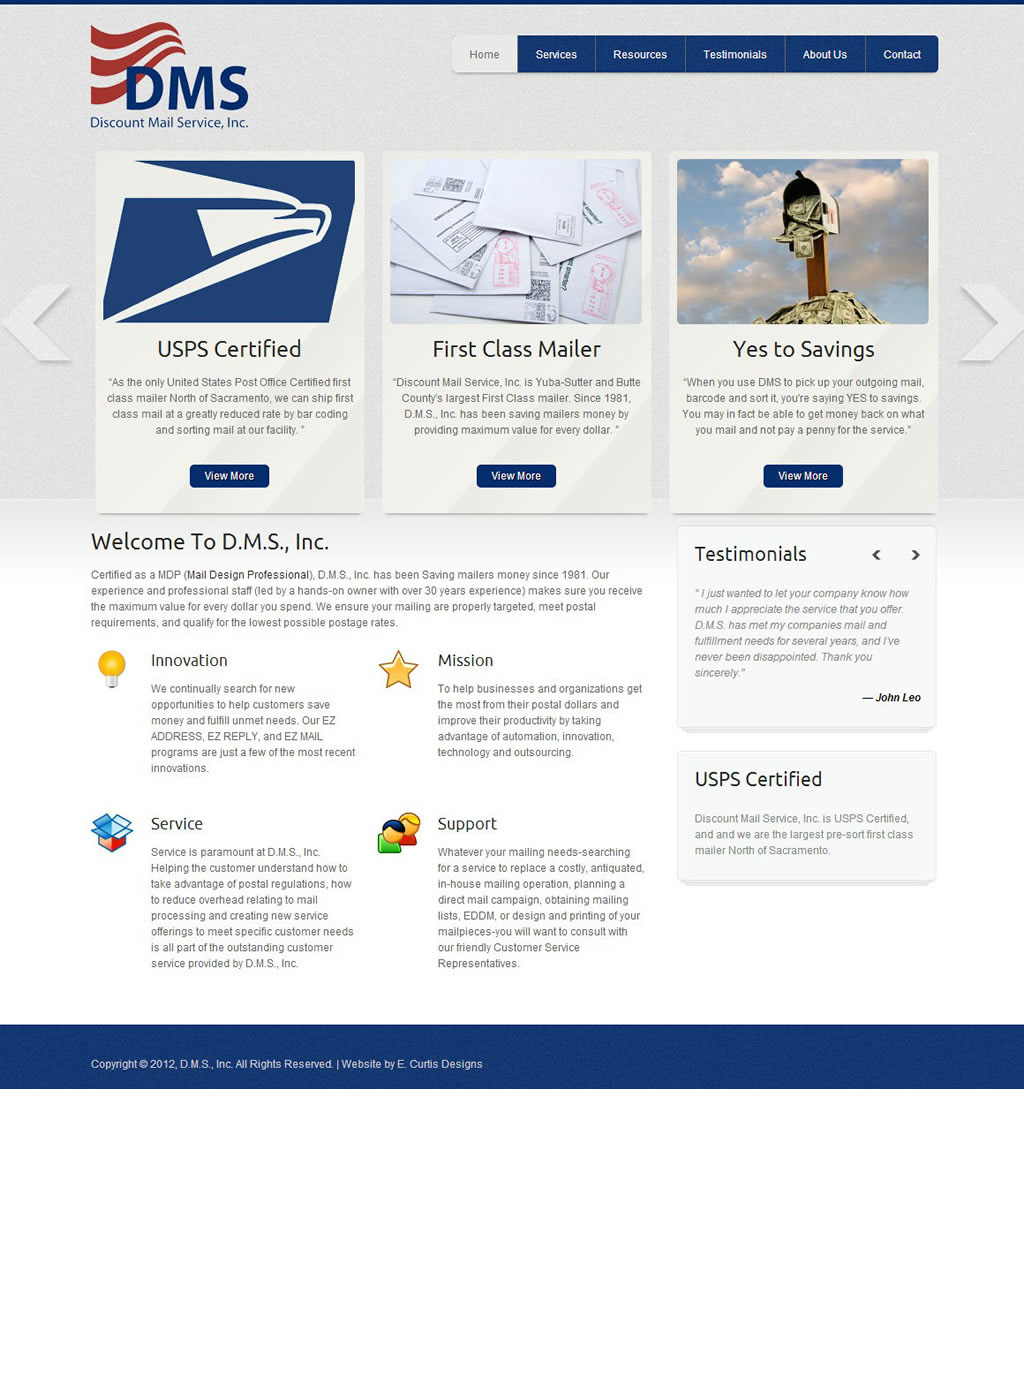 Home page of Discount Mail Services, Inc.